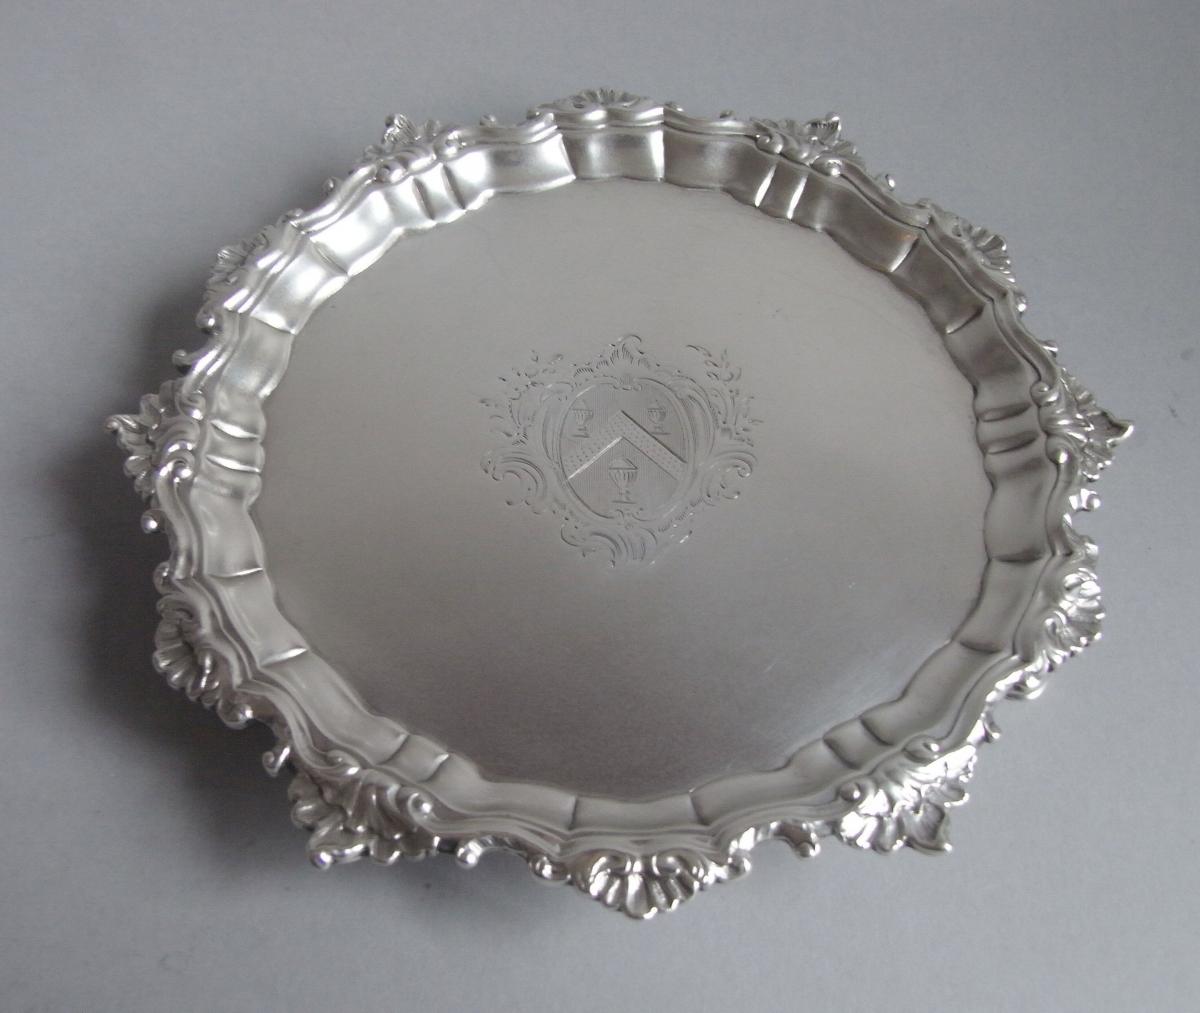 A good George II Salver made in London in 1754 by Thomas Robinson